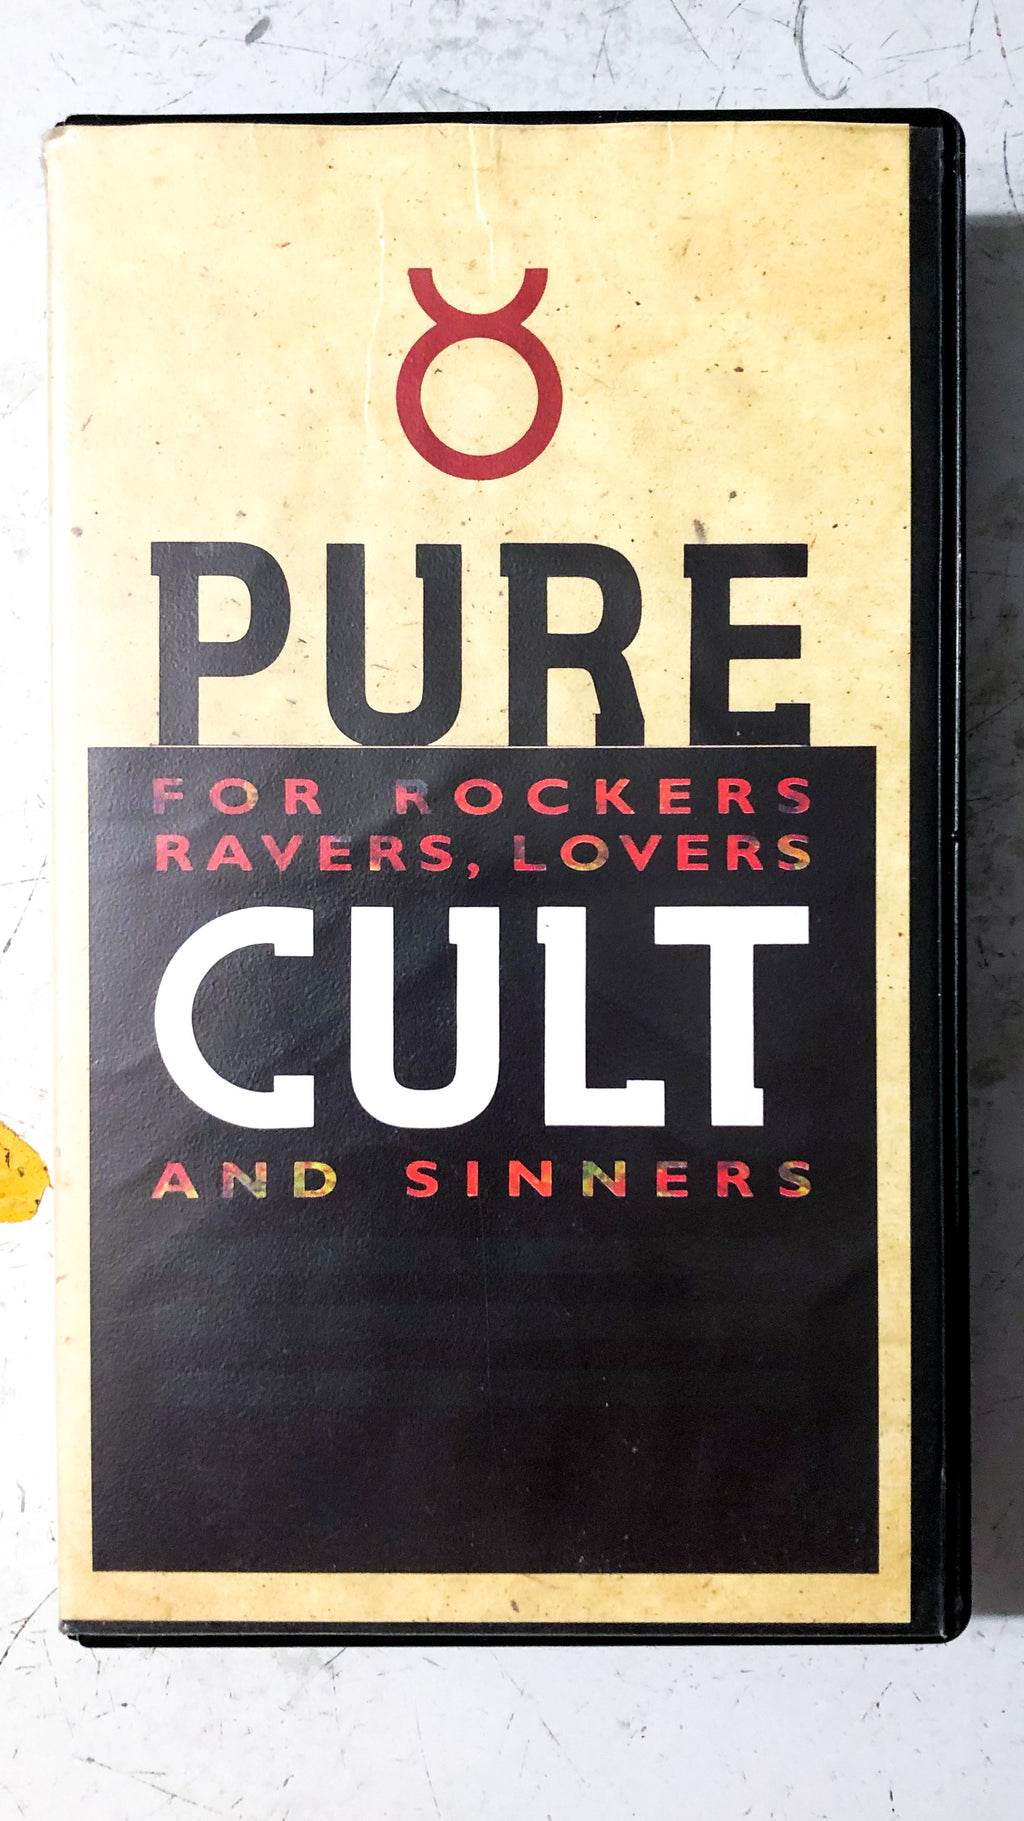 The Cult: Pure Cult - For Rockers Ravers Lovers and Sinners